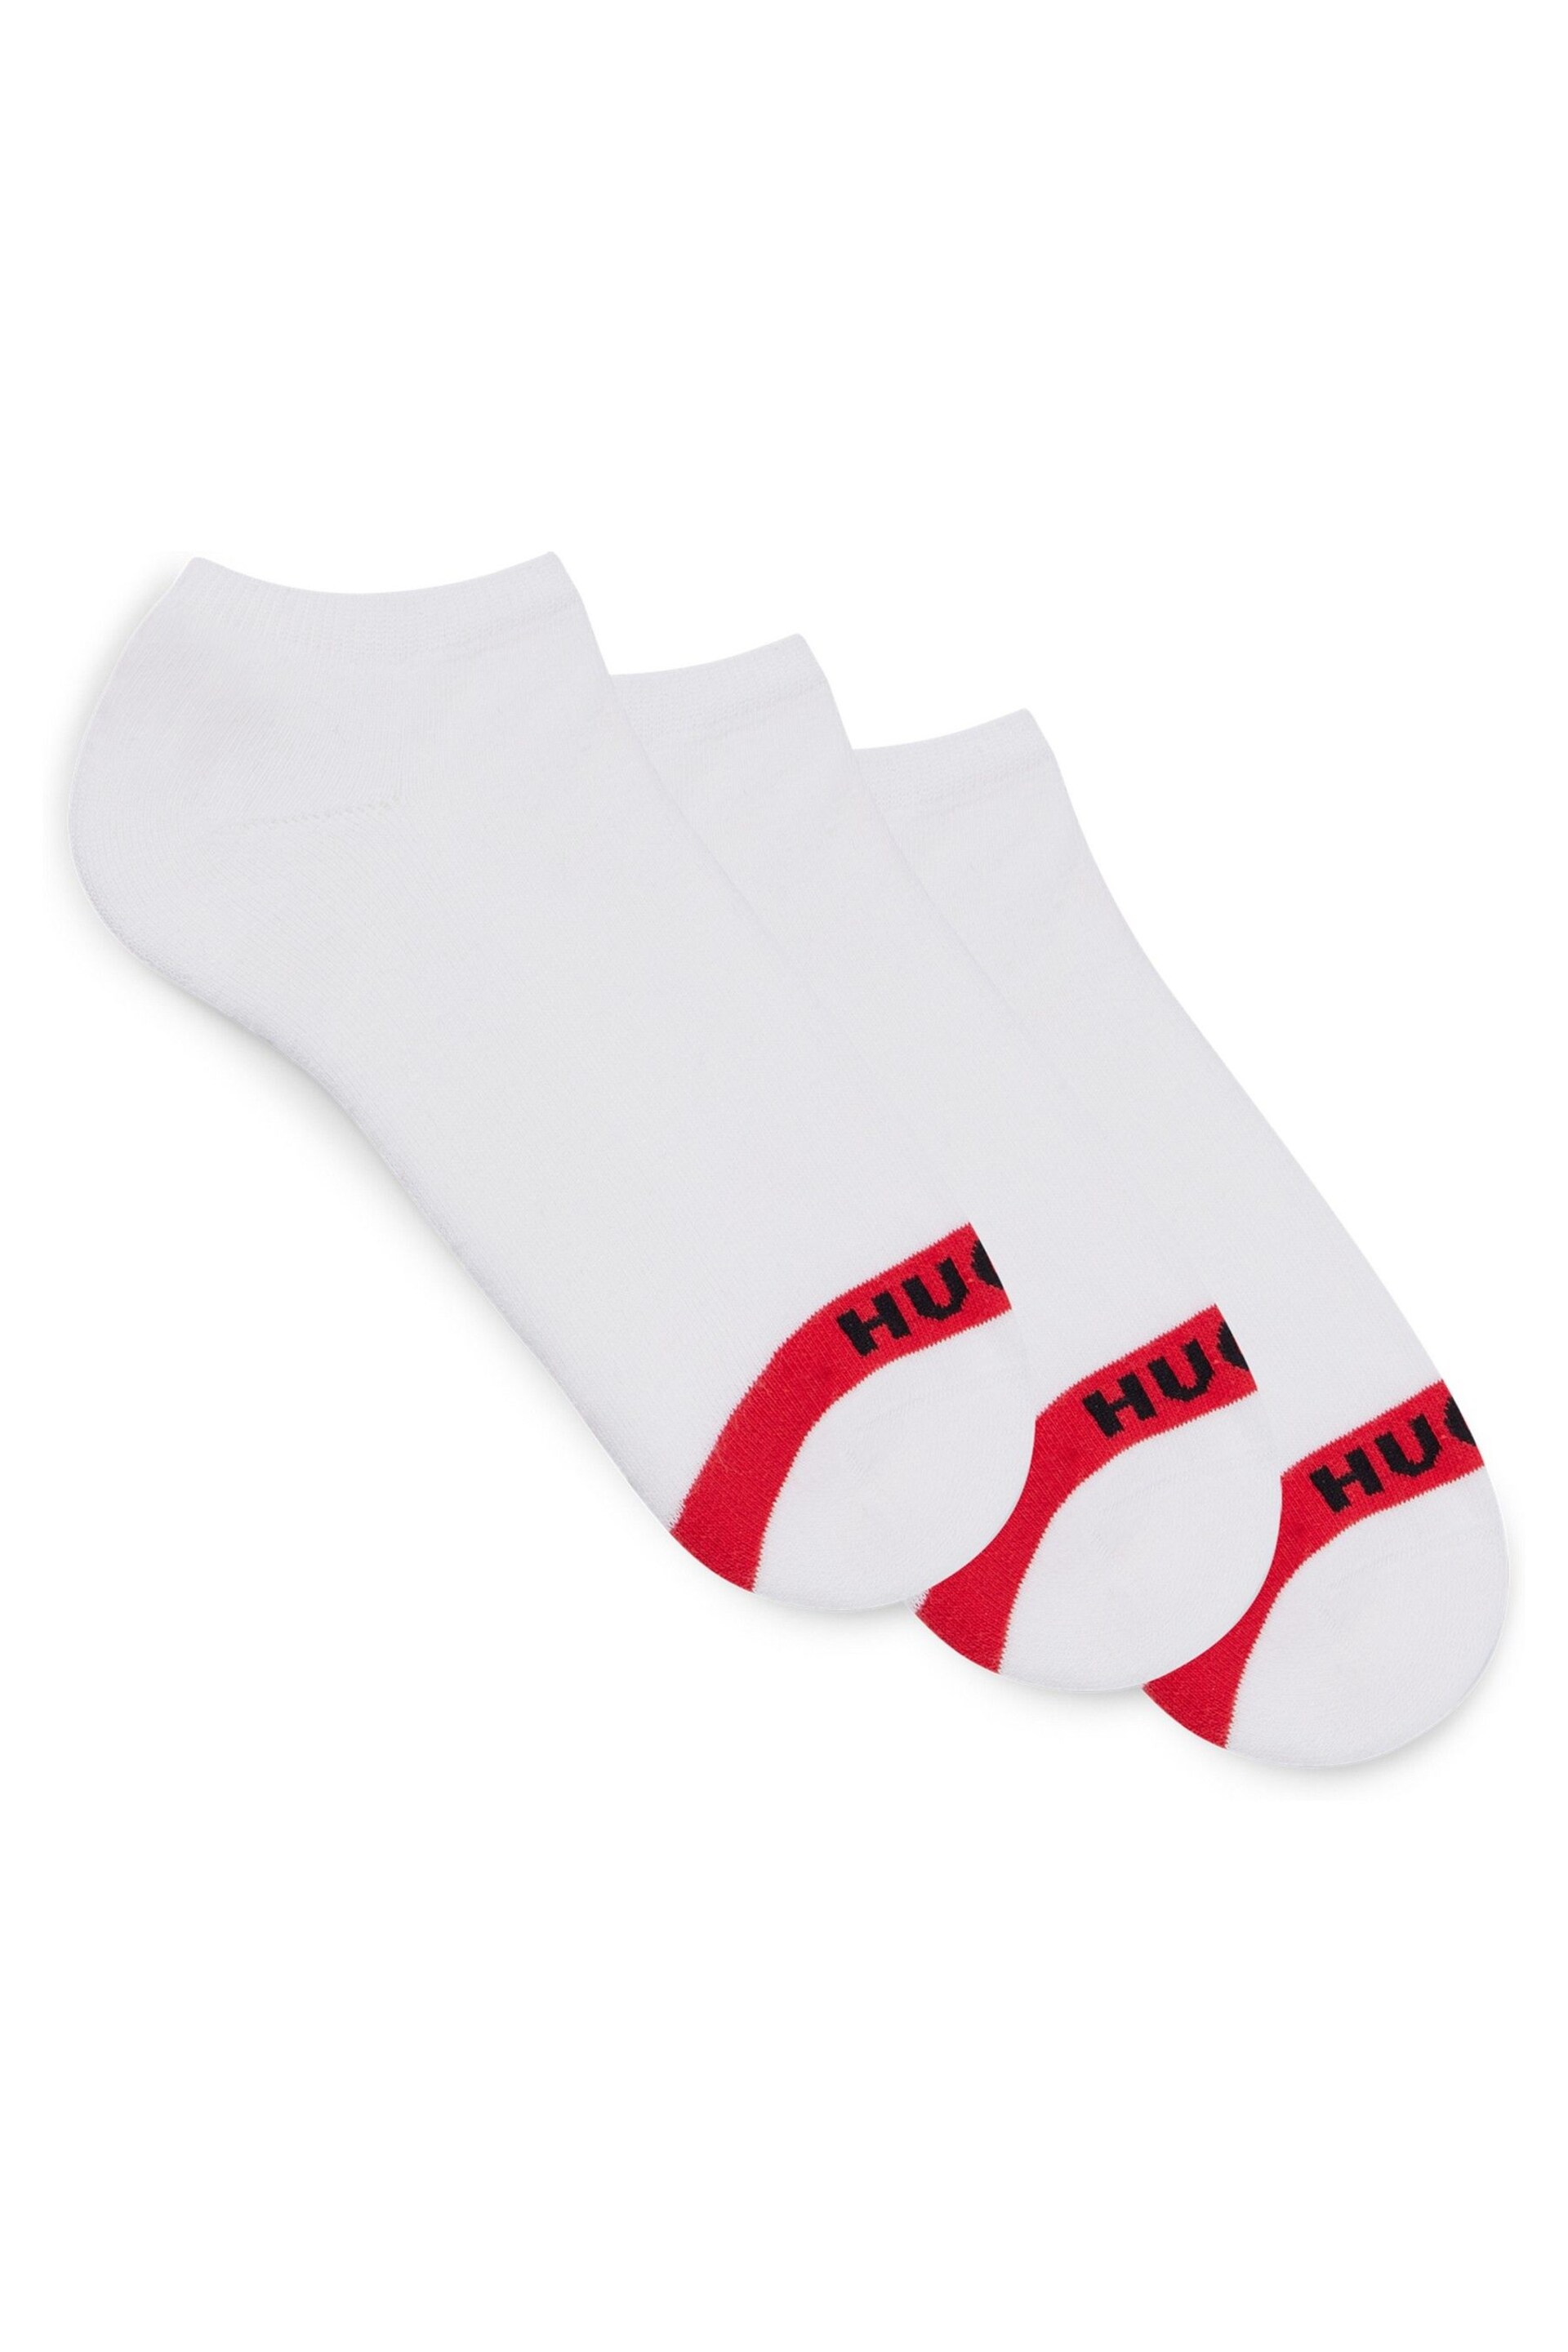 HUGO Invisible White Socks 3 Pack With Logo Details - Image 1 of 3